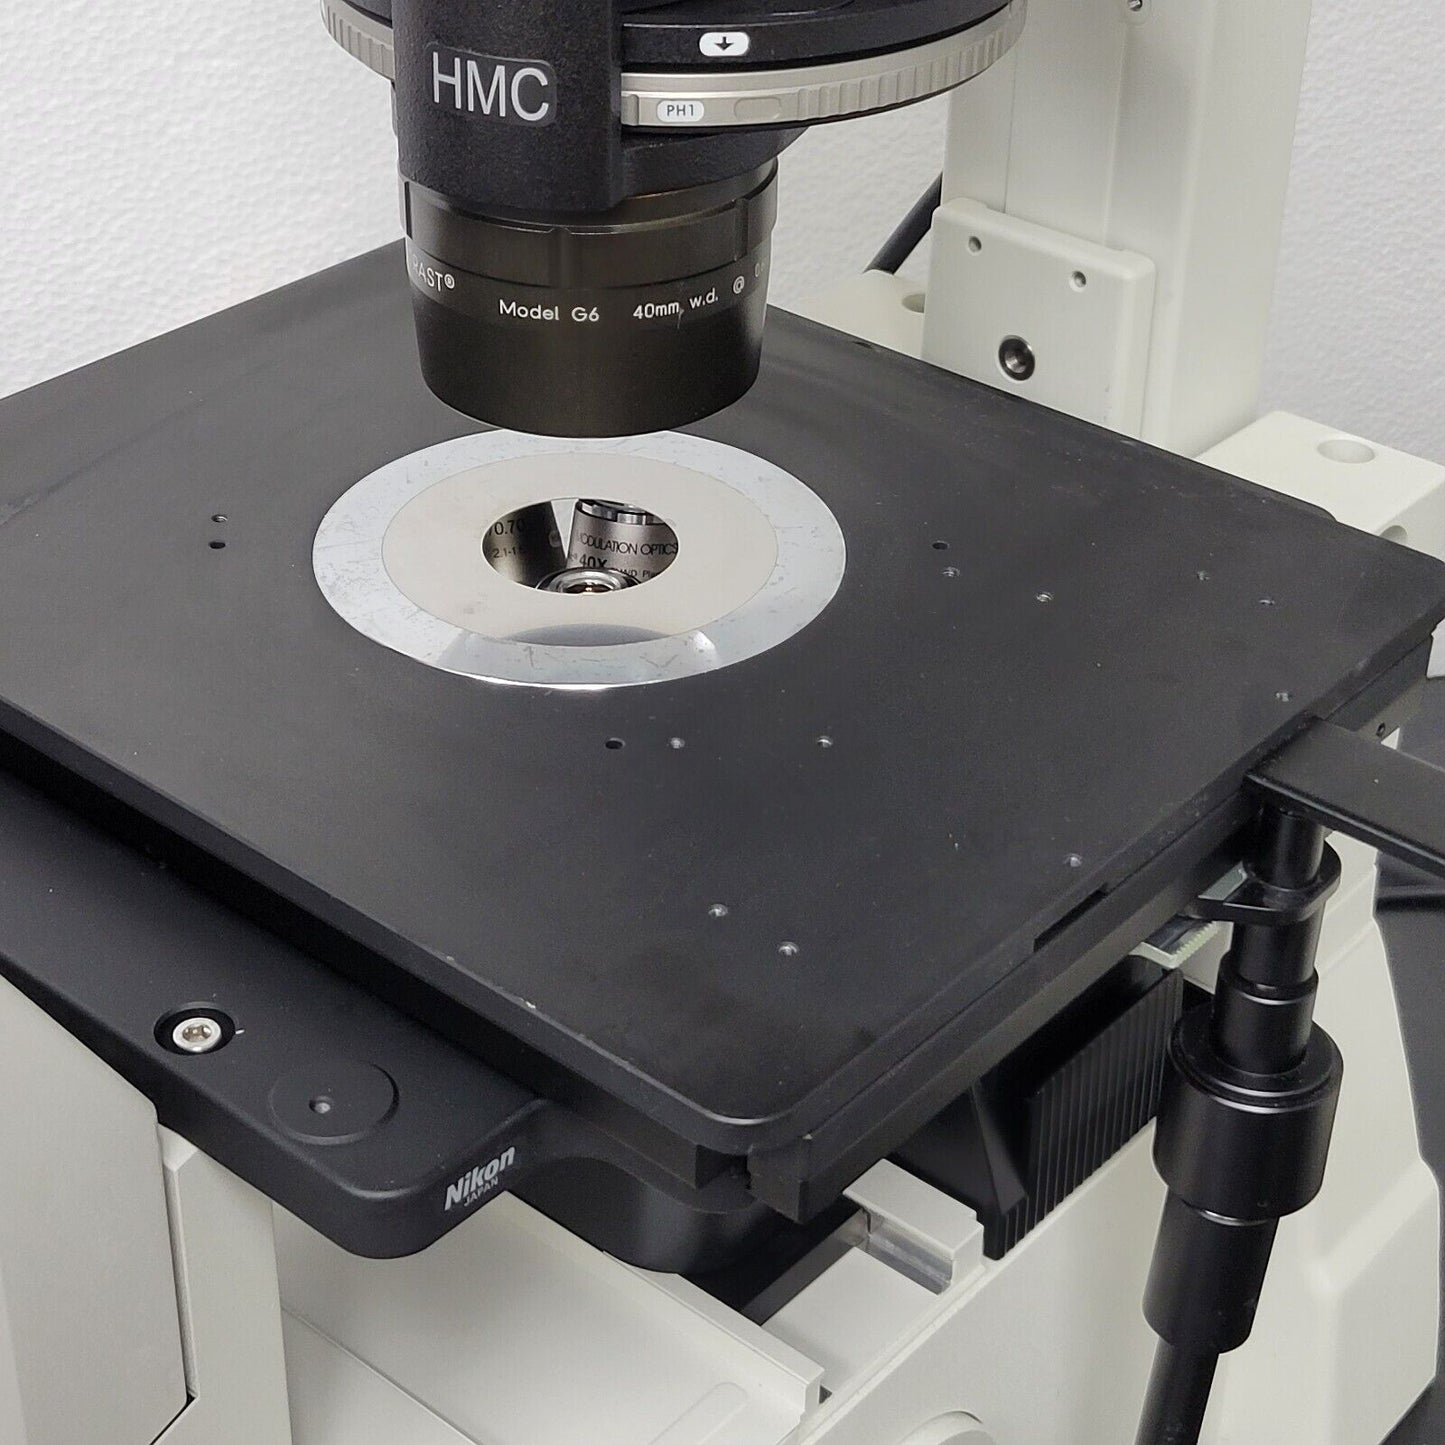 Nikon Inverted Microscope Eclipse TE2000-S with Hoffman Modulation Contrast - microscopemarketplace